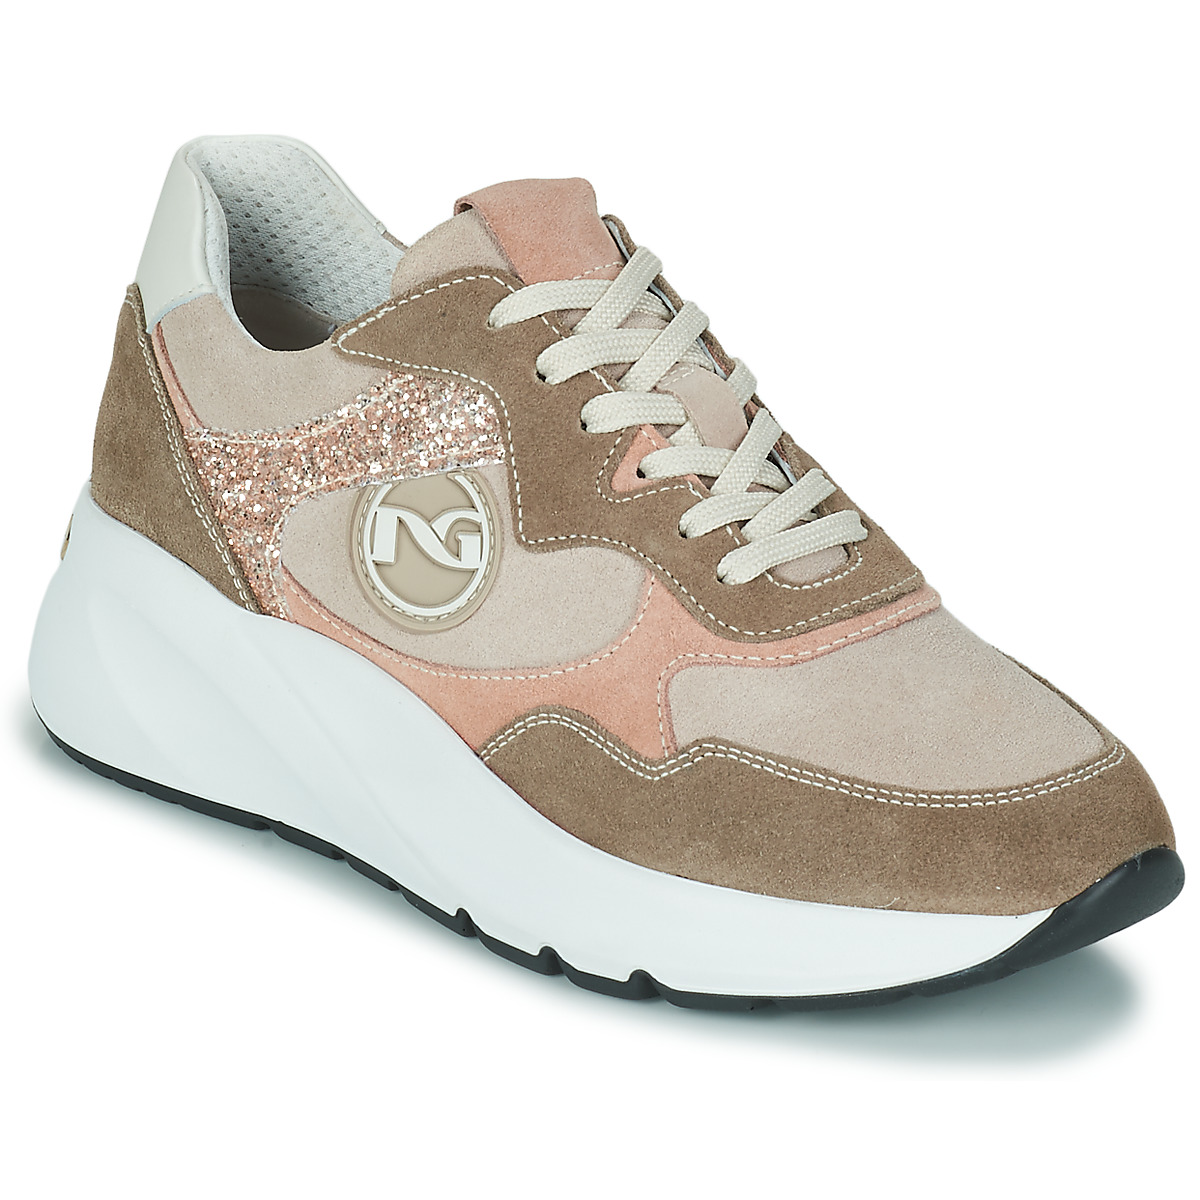 Shoes Women Low top trainers NeroGiardini E218040D-501 Brown / Pink